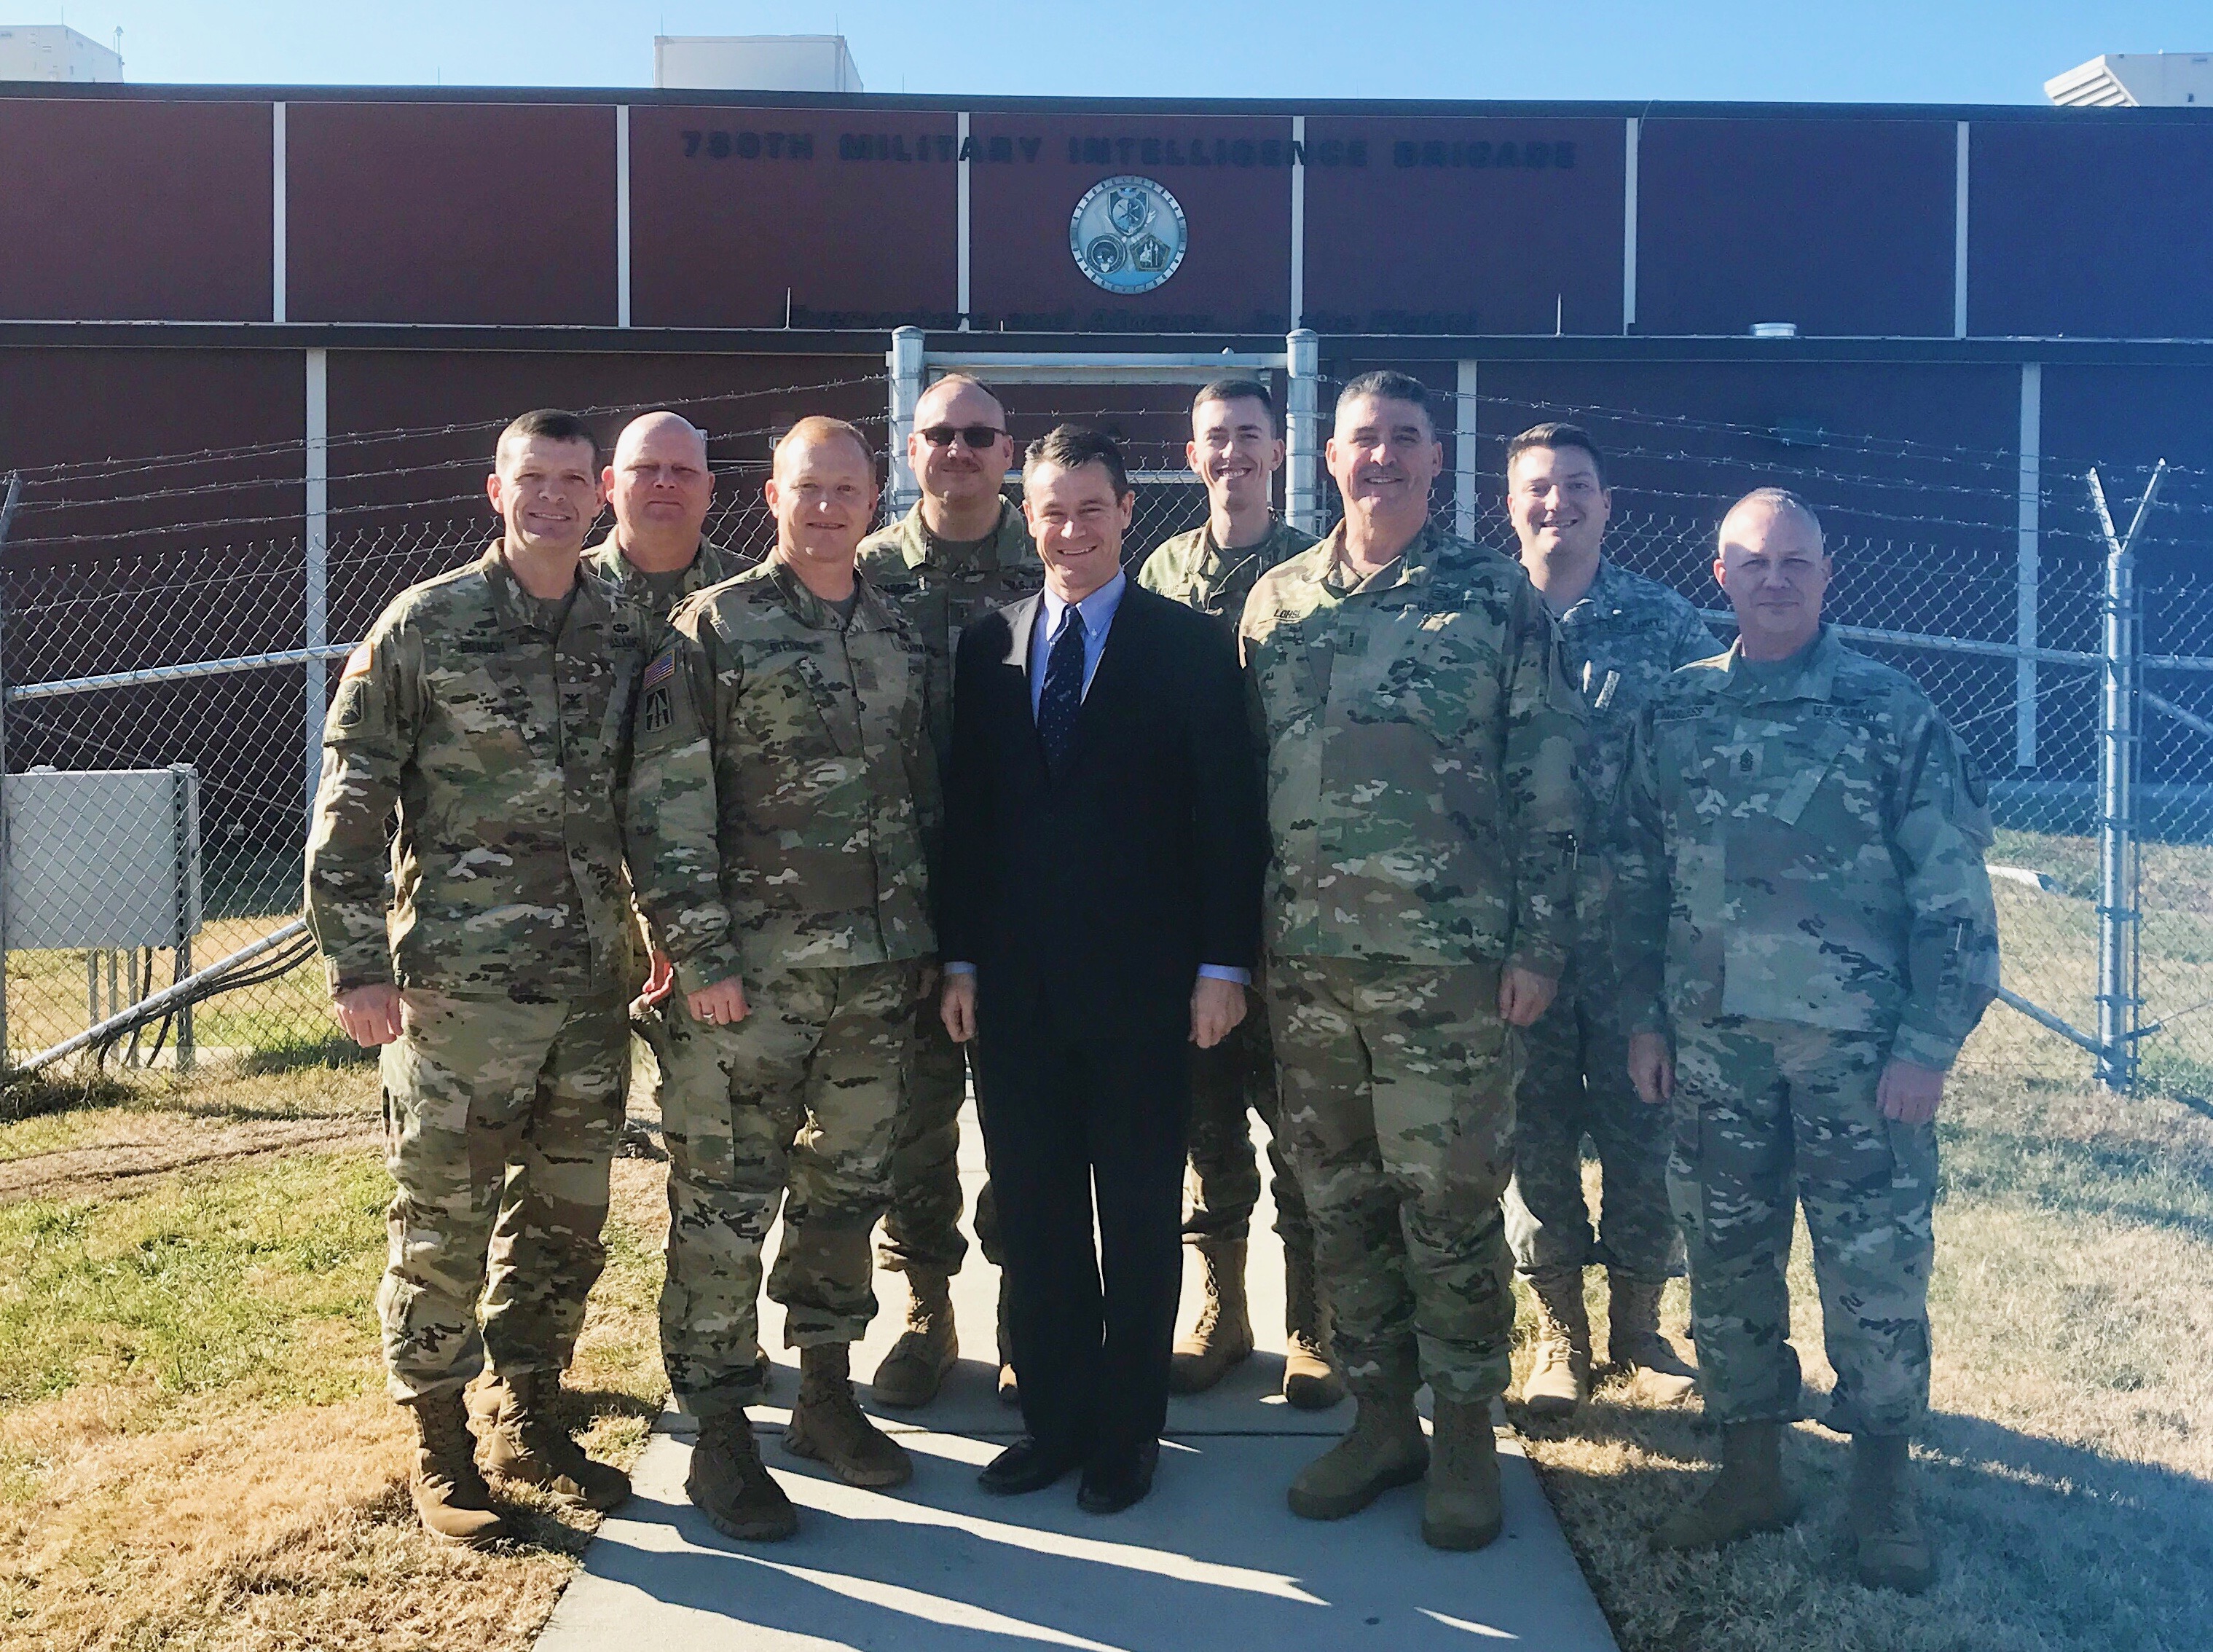 Senator Young Visits with Members of the Indiana National Guard at Fort M